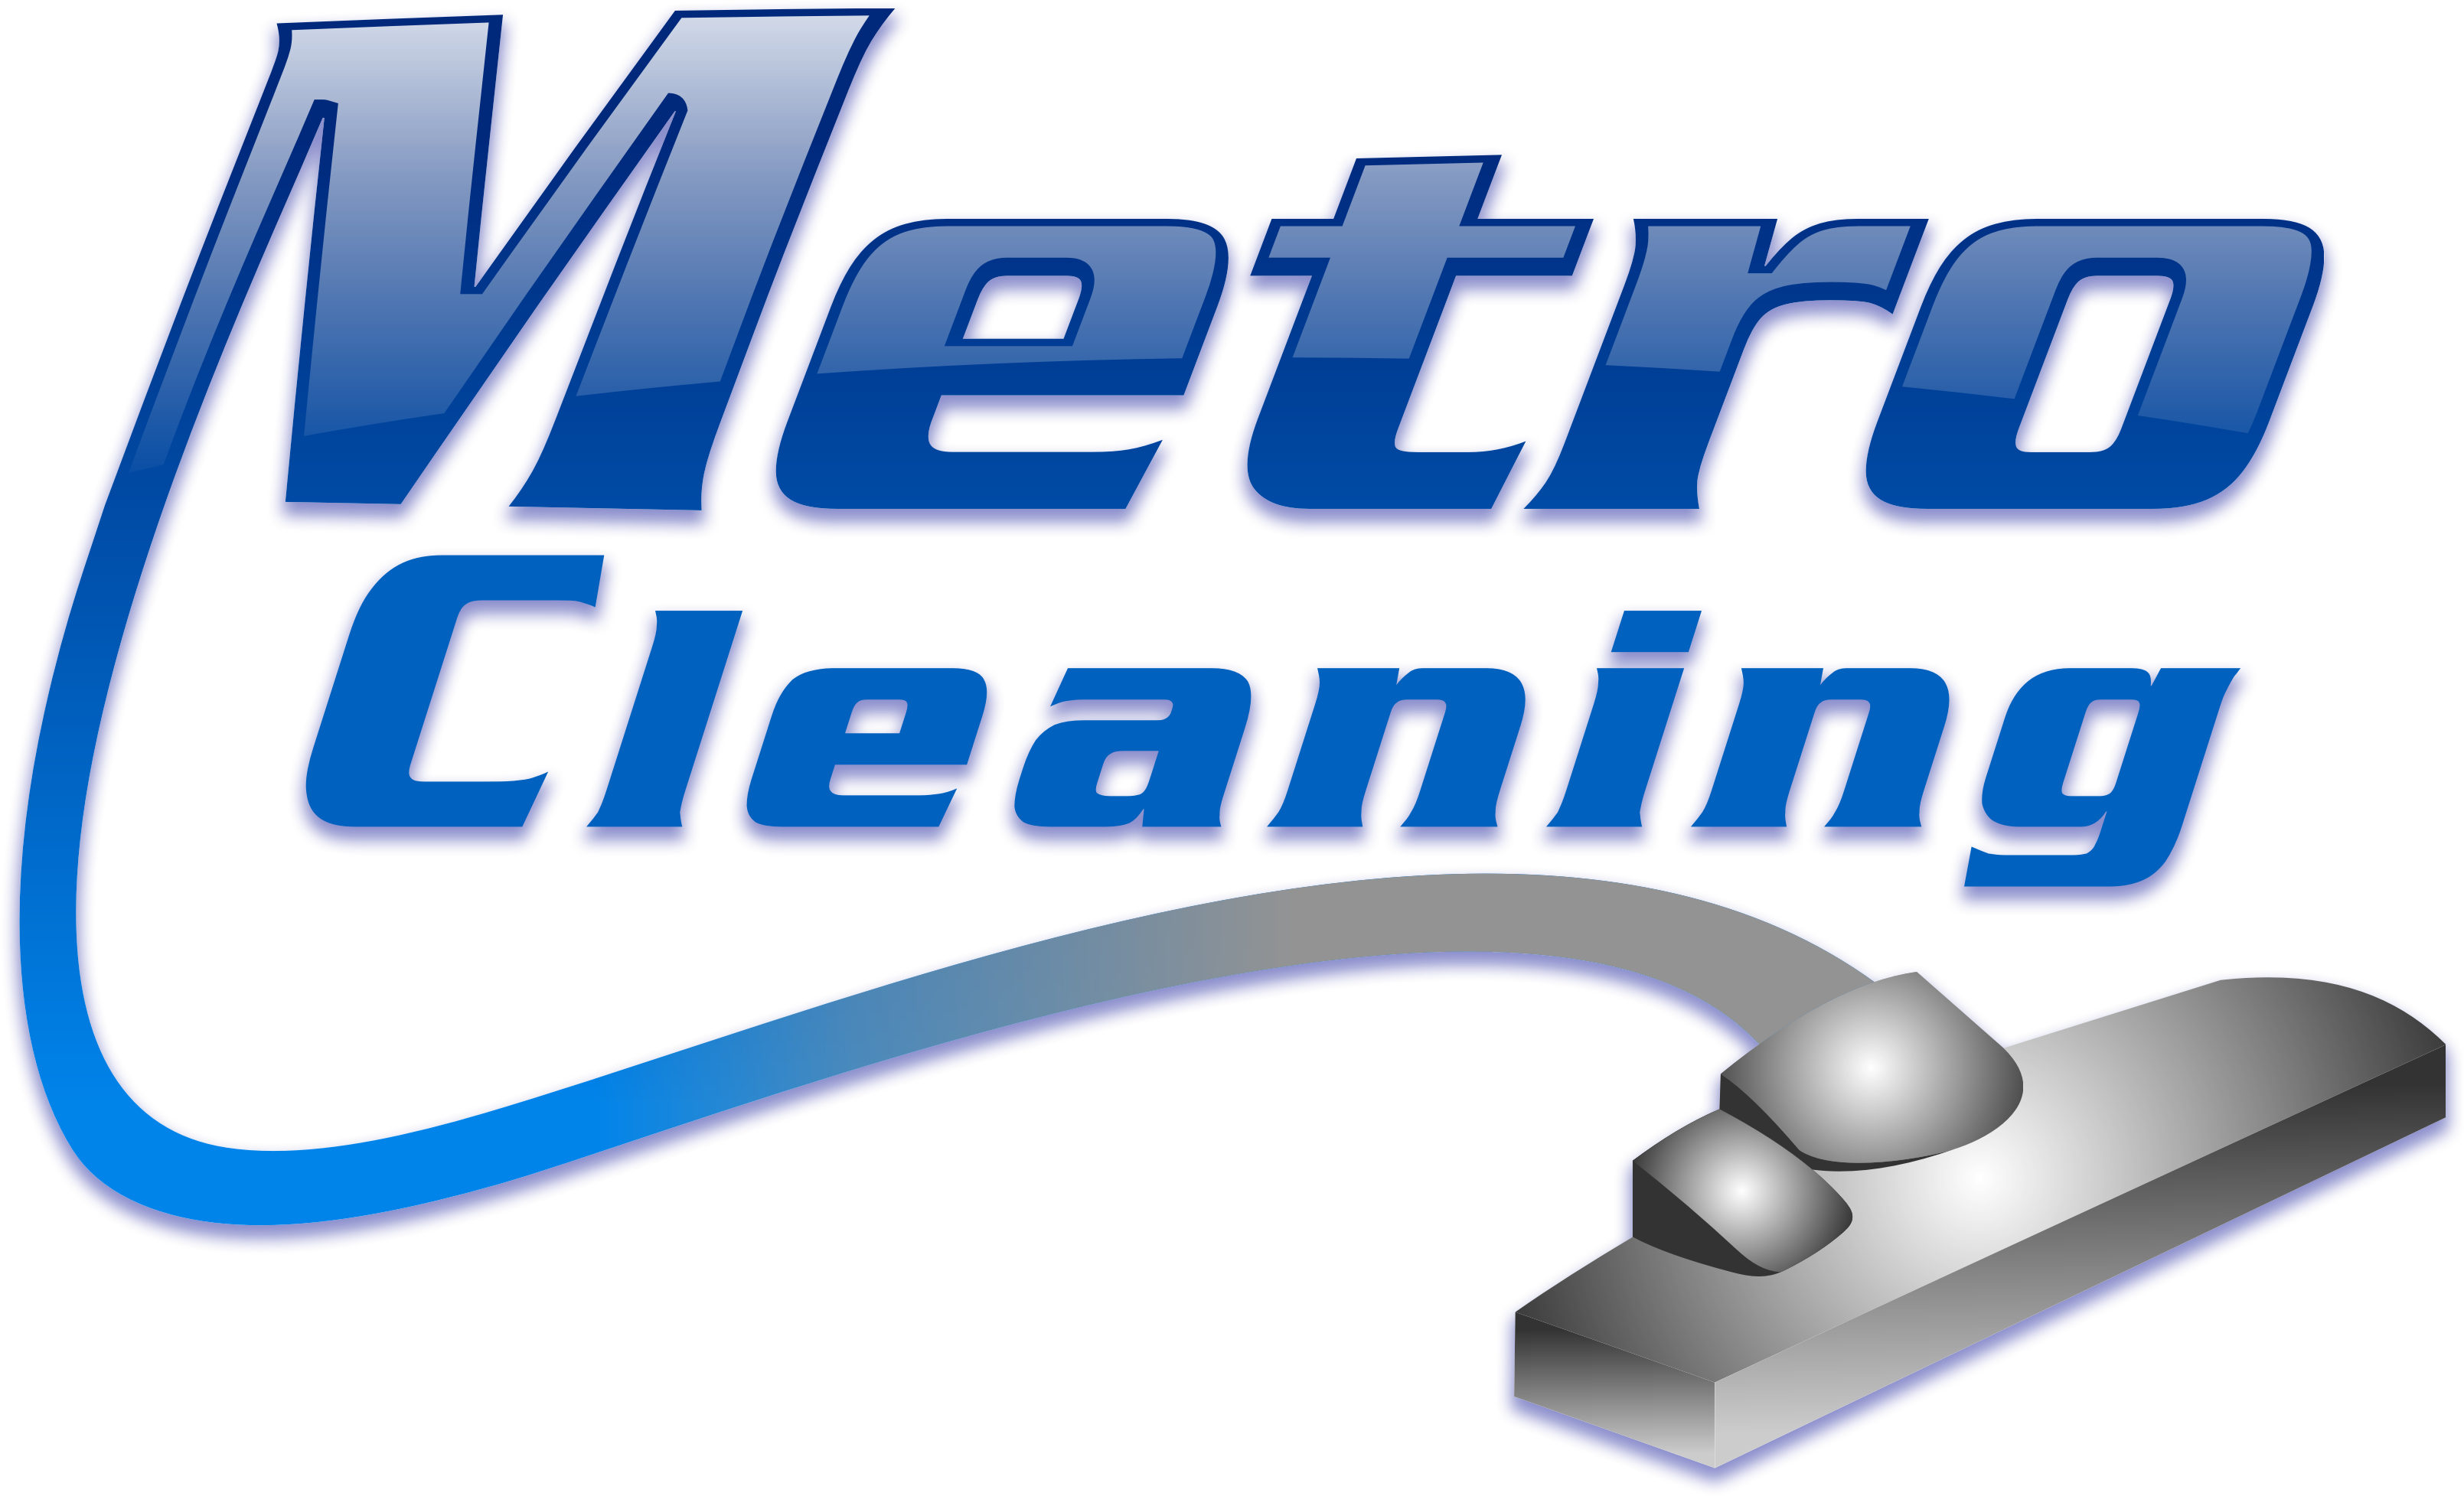 Logo - Cleaning Company (3248x1992)